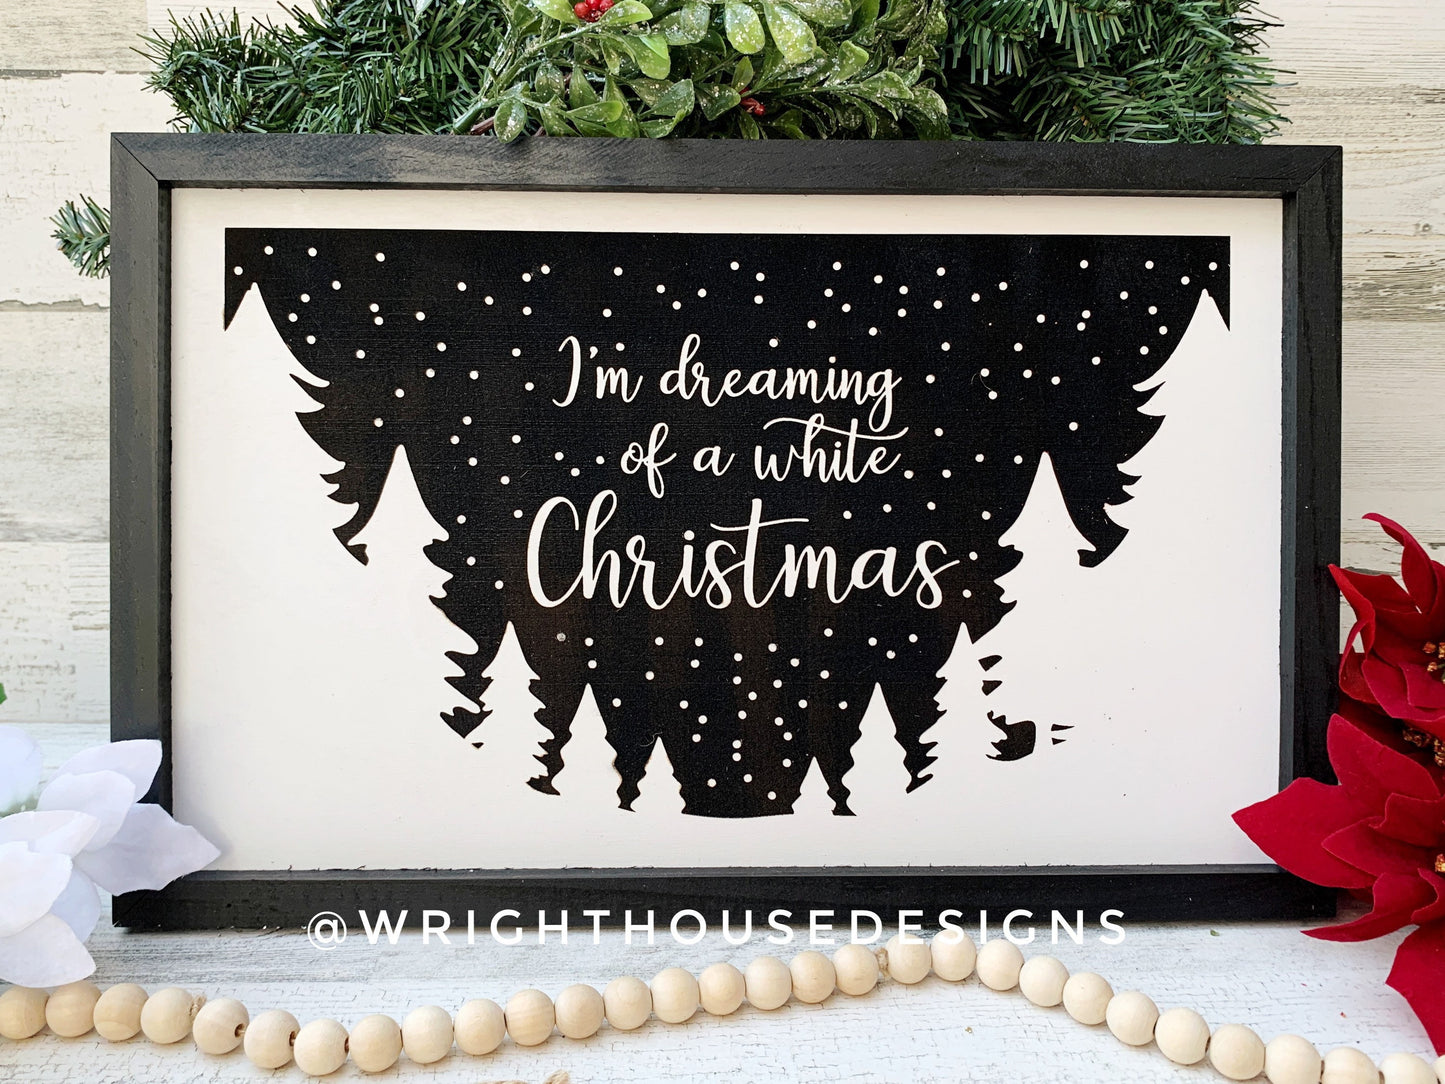 Dreaming of A White Christmas - Coffee Bar Sign - Seasonal Home and Kitchen Decor - Handcrafted Wooden Framed Wall Art - Holiday Decorations